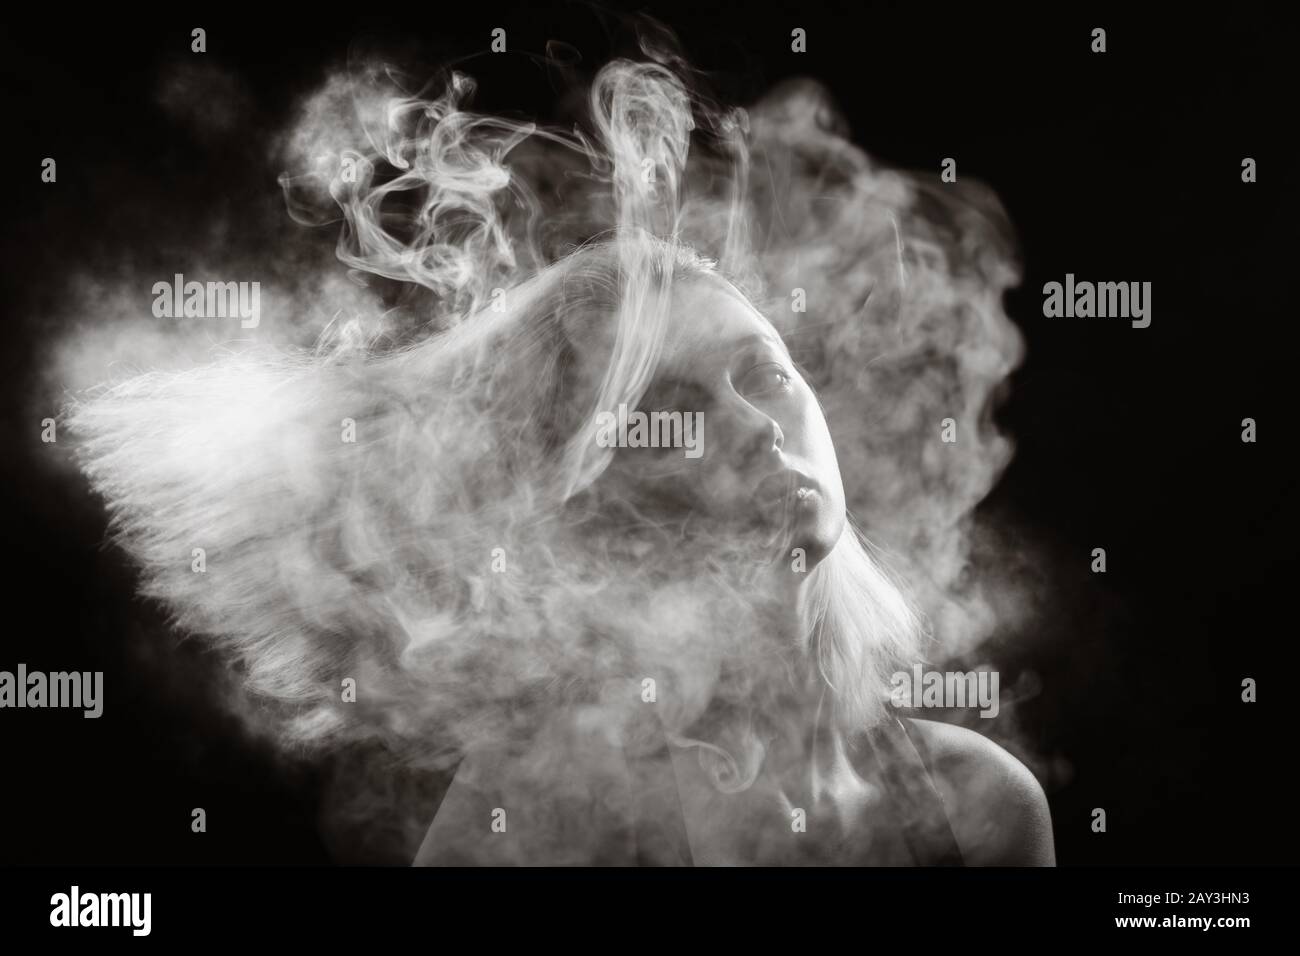 young blond woman dancing at white smoke cloud on black background, monochrome Stock Photo